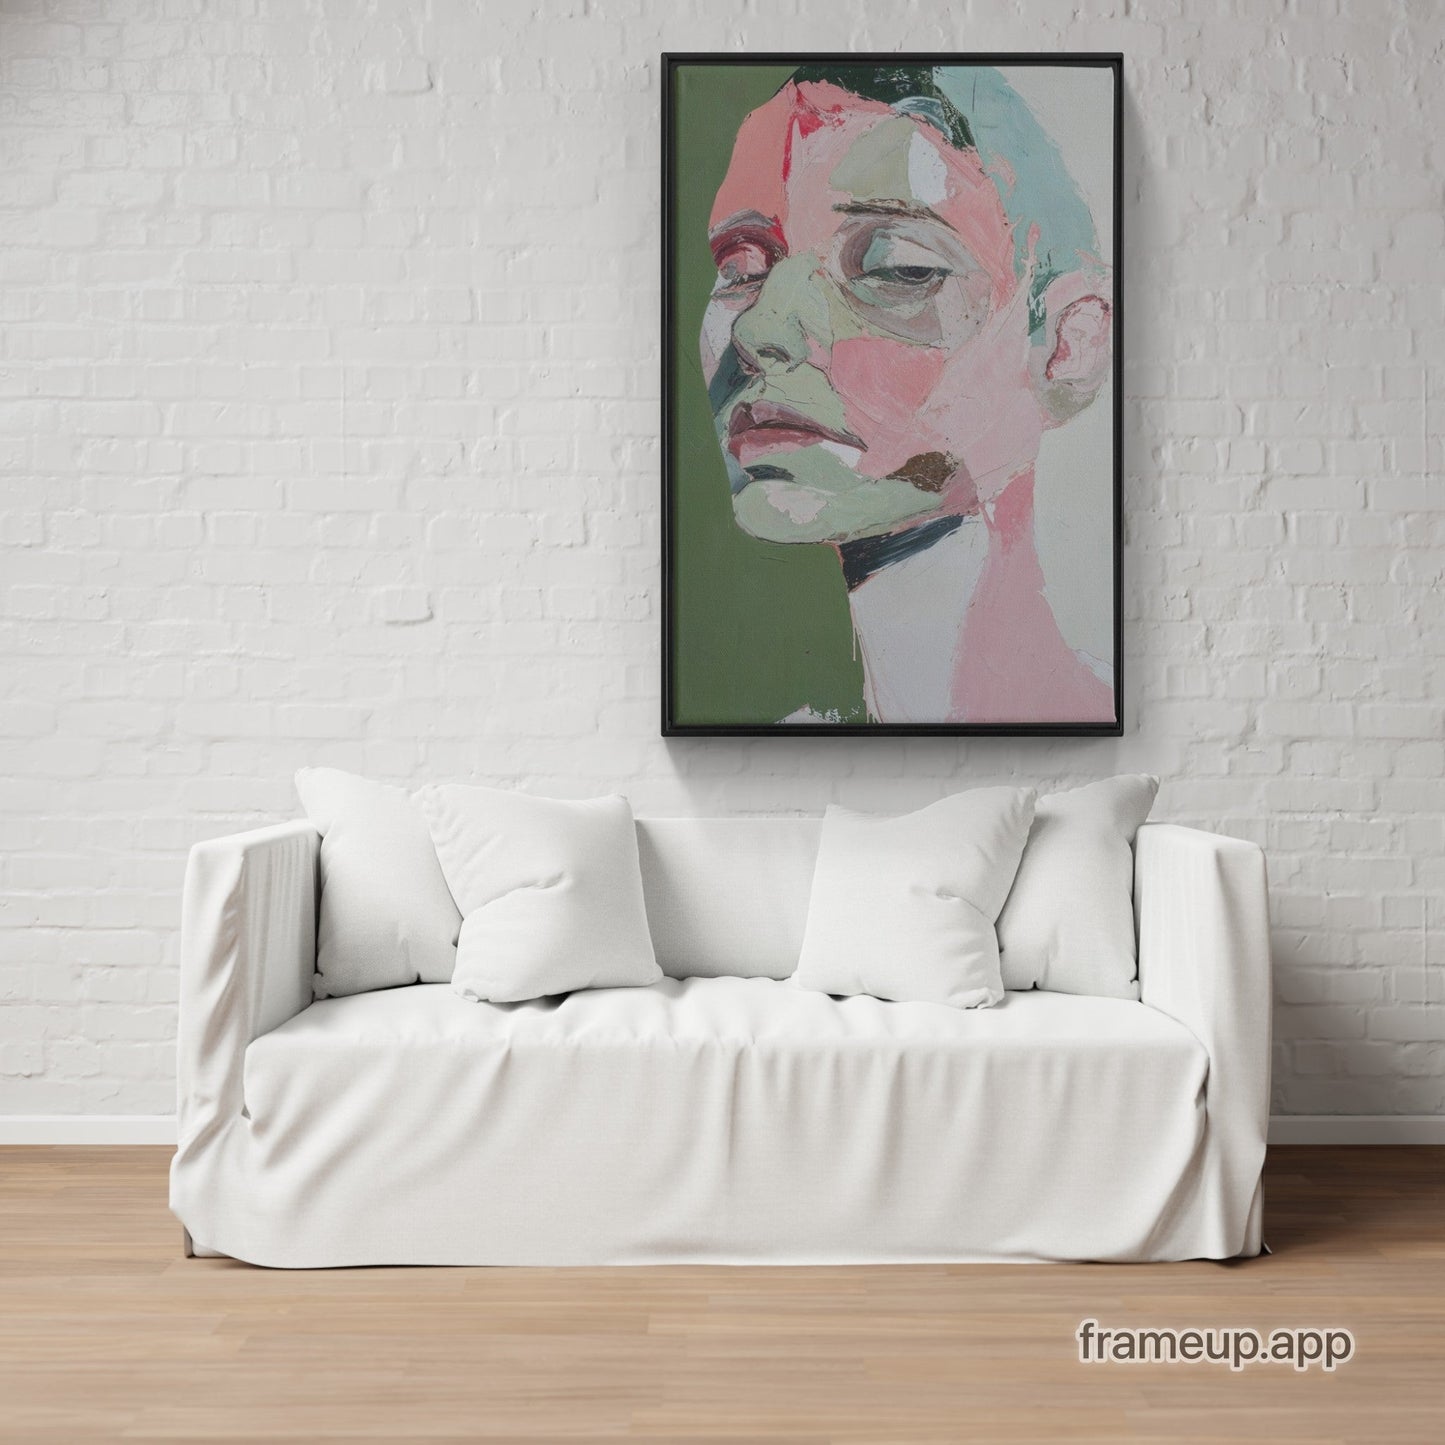 An abstract painting of a woman's face, Portrait In Pastels - XXL Framed Canvas Wraps, hanging on a canvas.